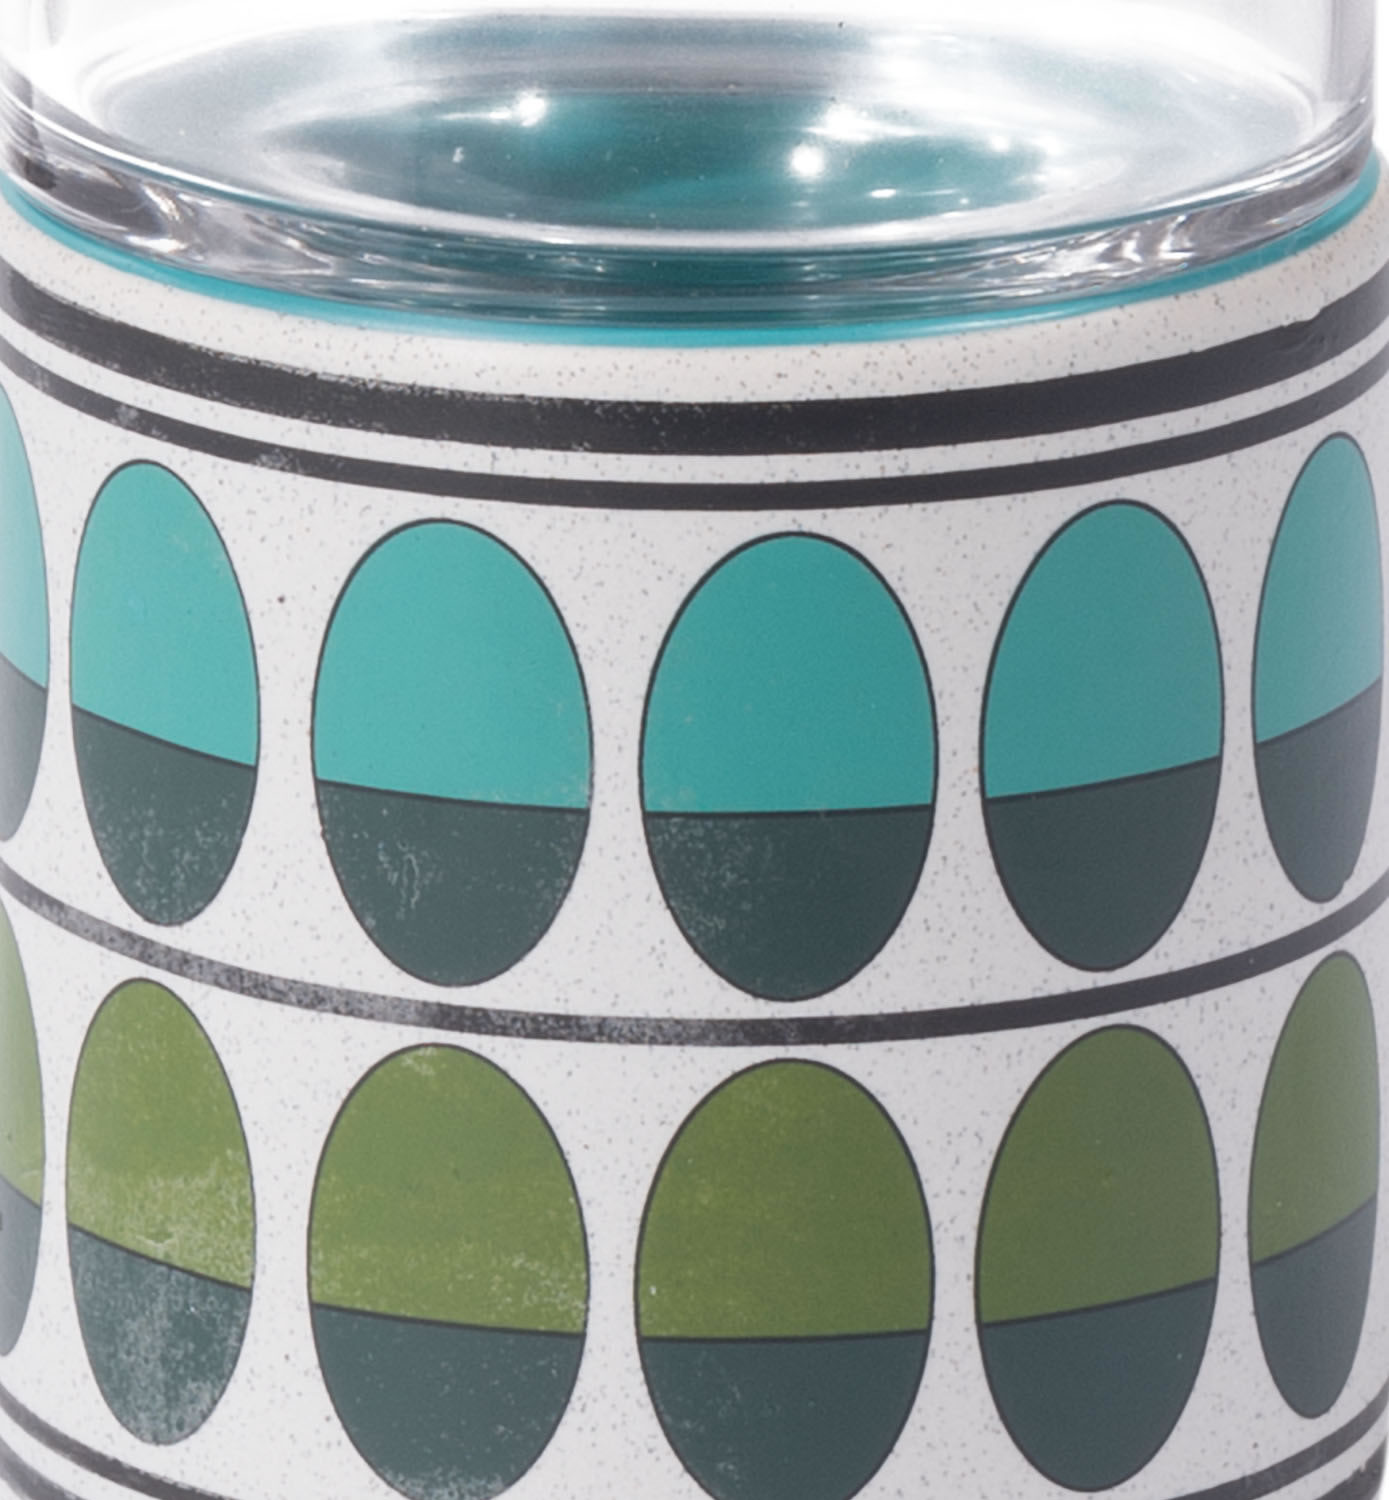 4.1" x 4.1" x 7.3" Green and Teal Ceramic and Glass Small Candle Holder